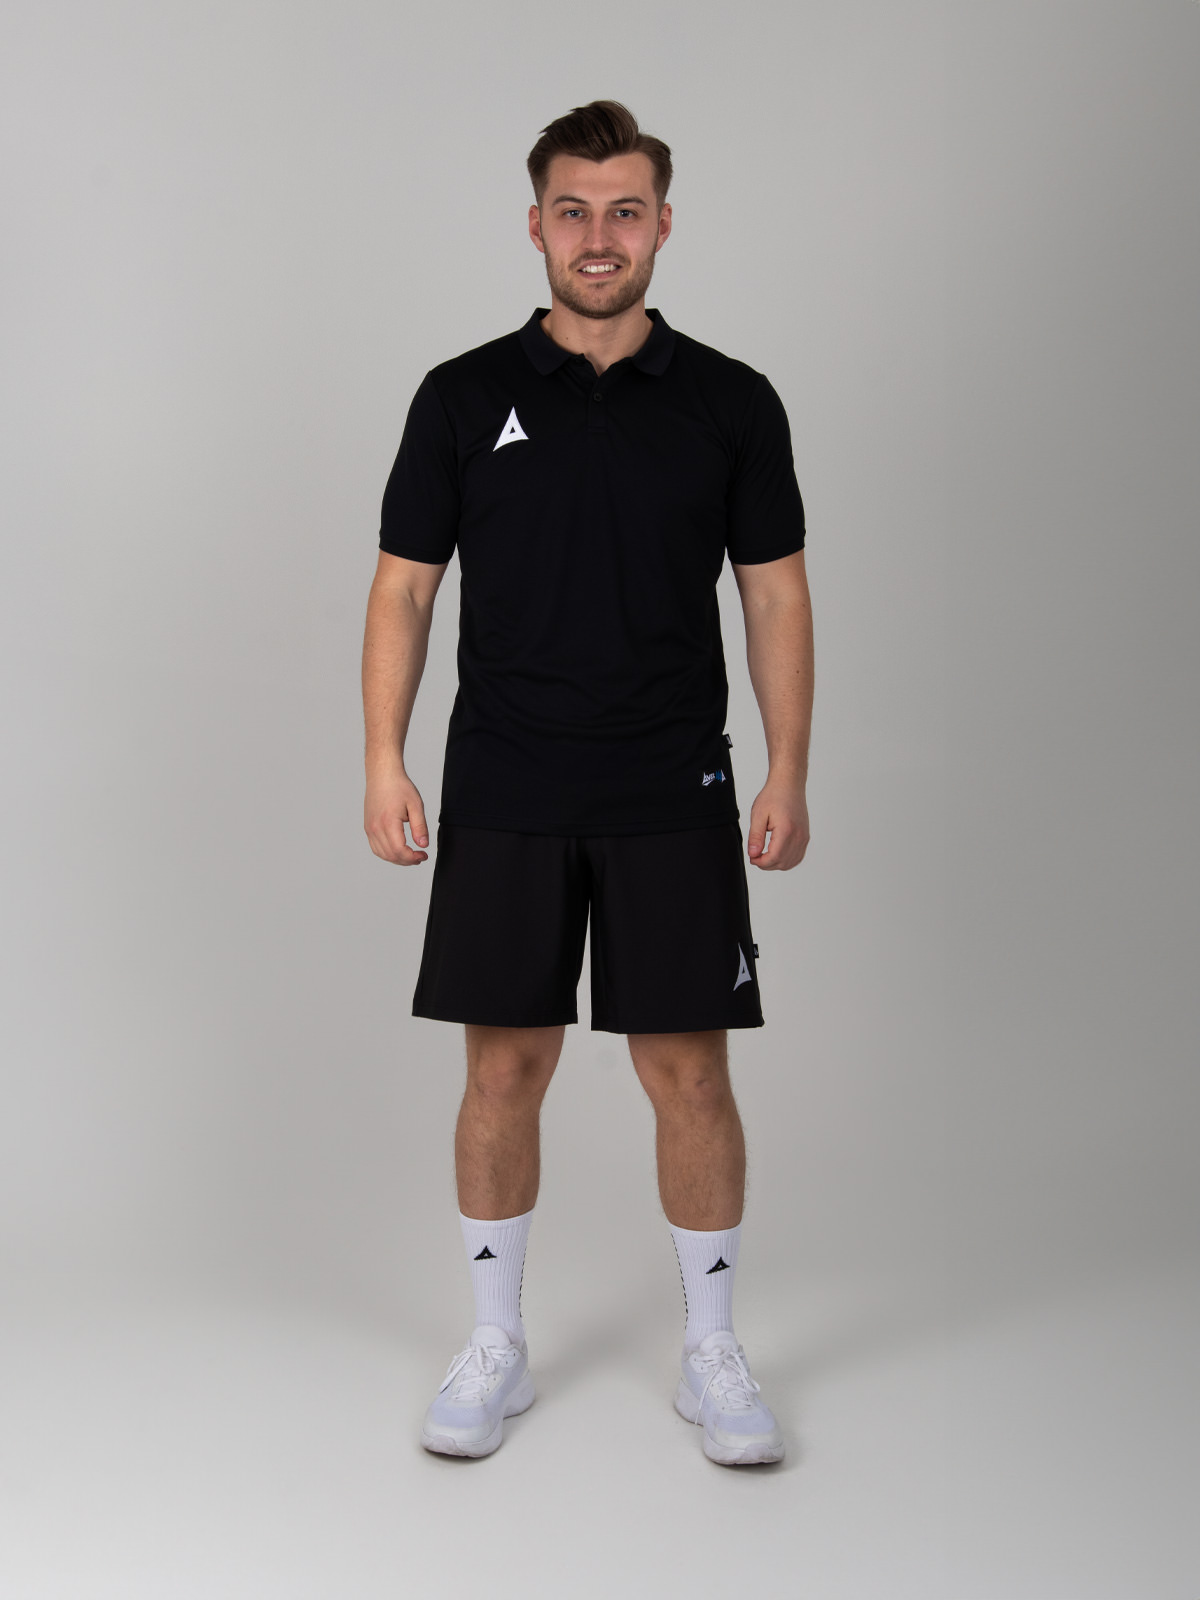 styled man wearing a black polo shirt with black tech short and grip socks